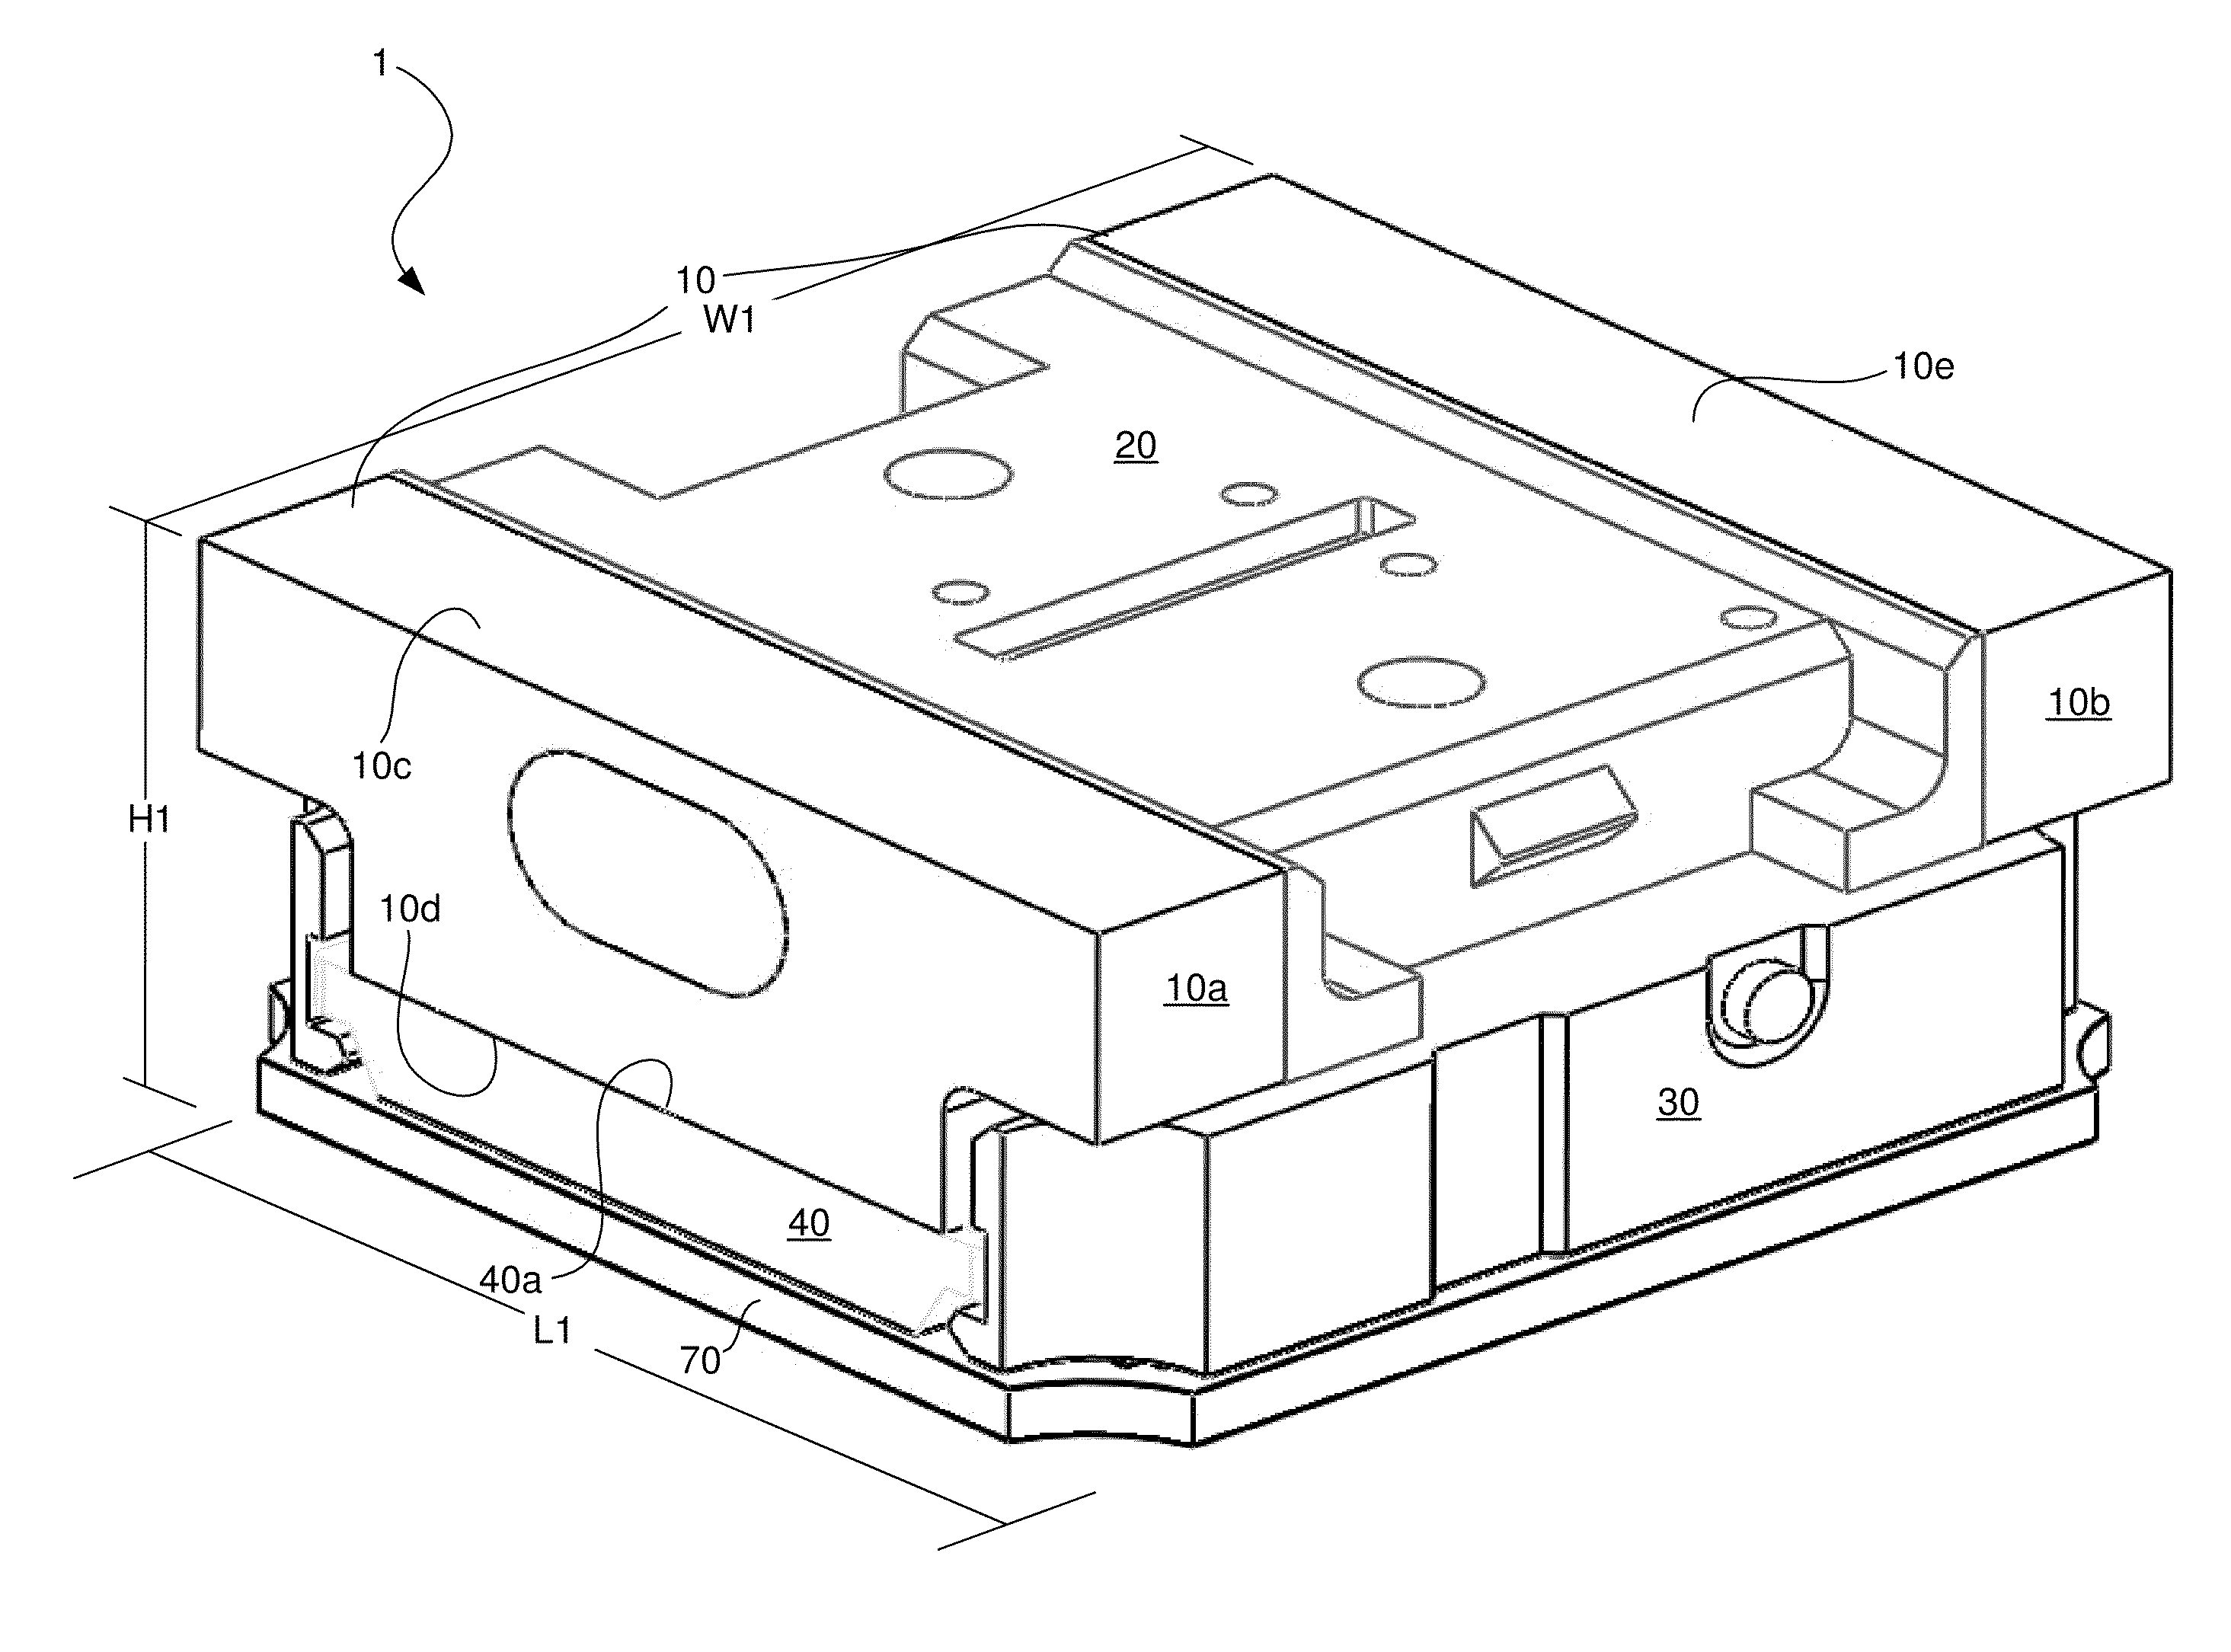 Protective socket for use with a parallel optical transceiver module for protecting components of the module from airborne matter